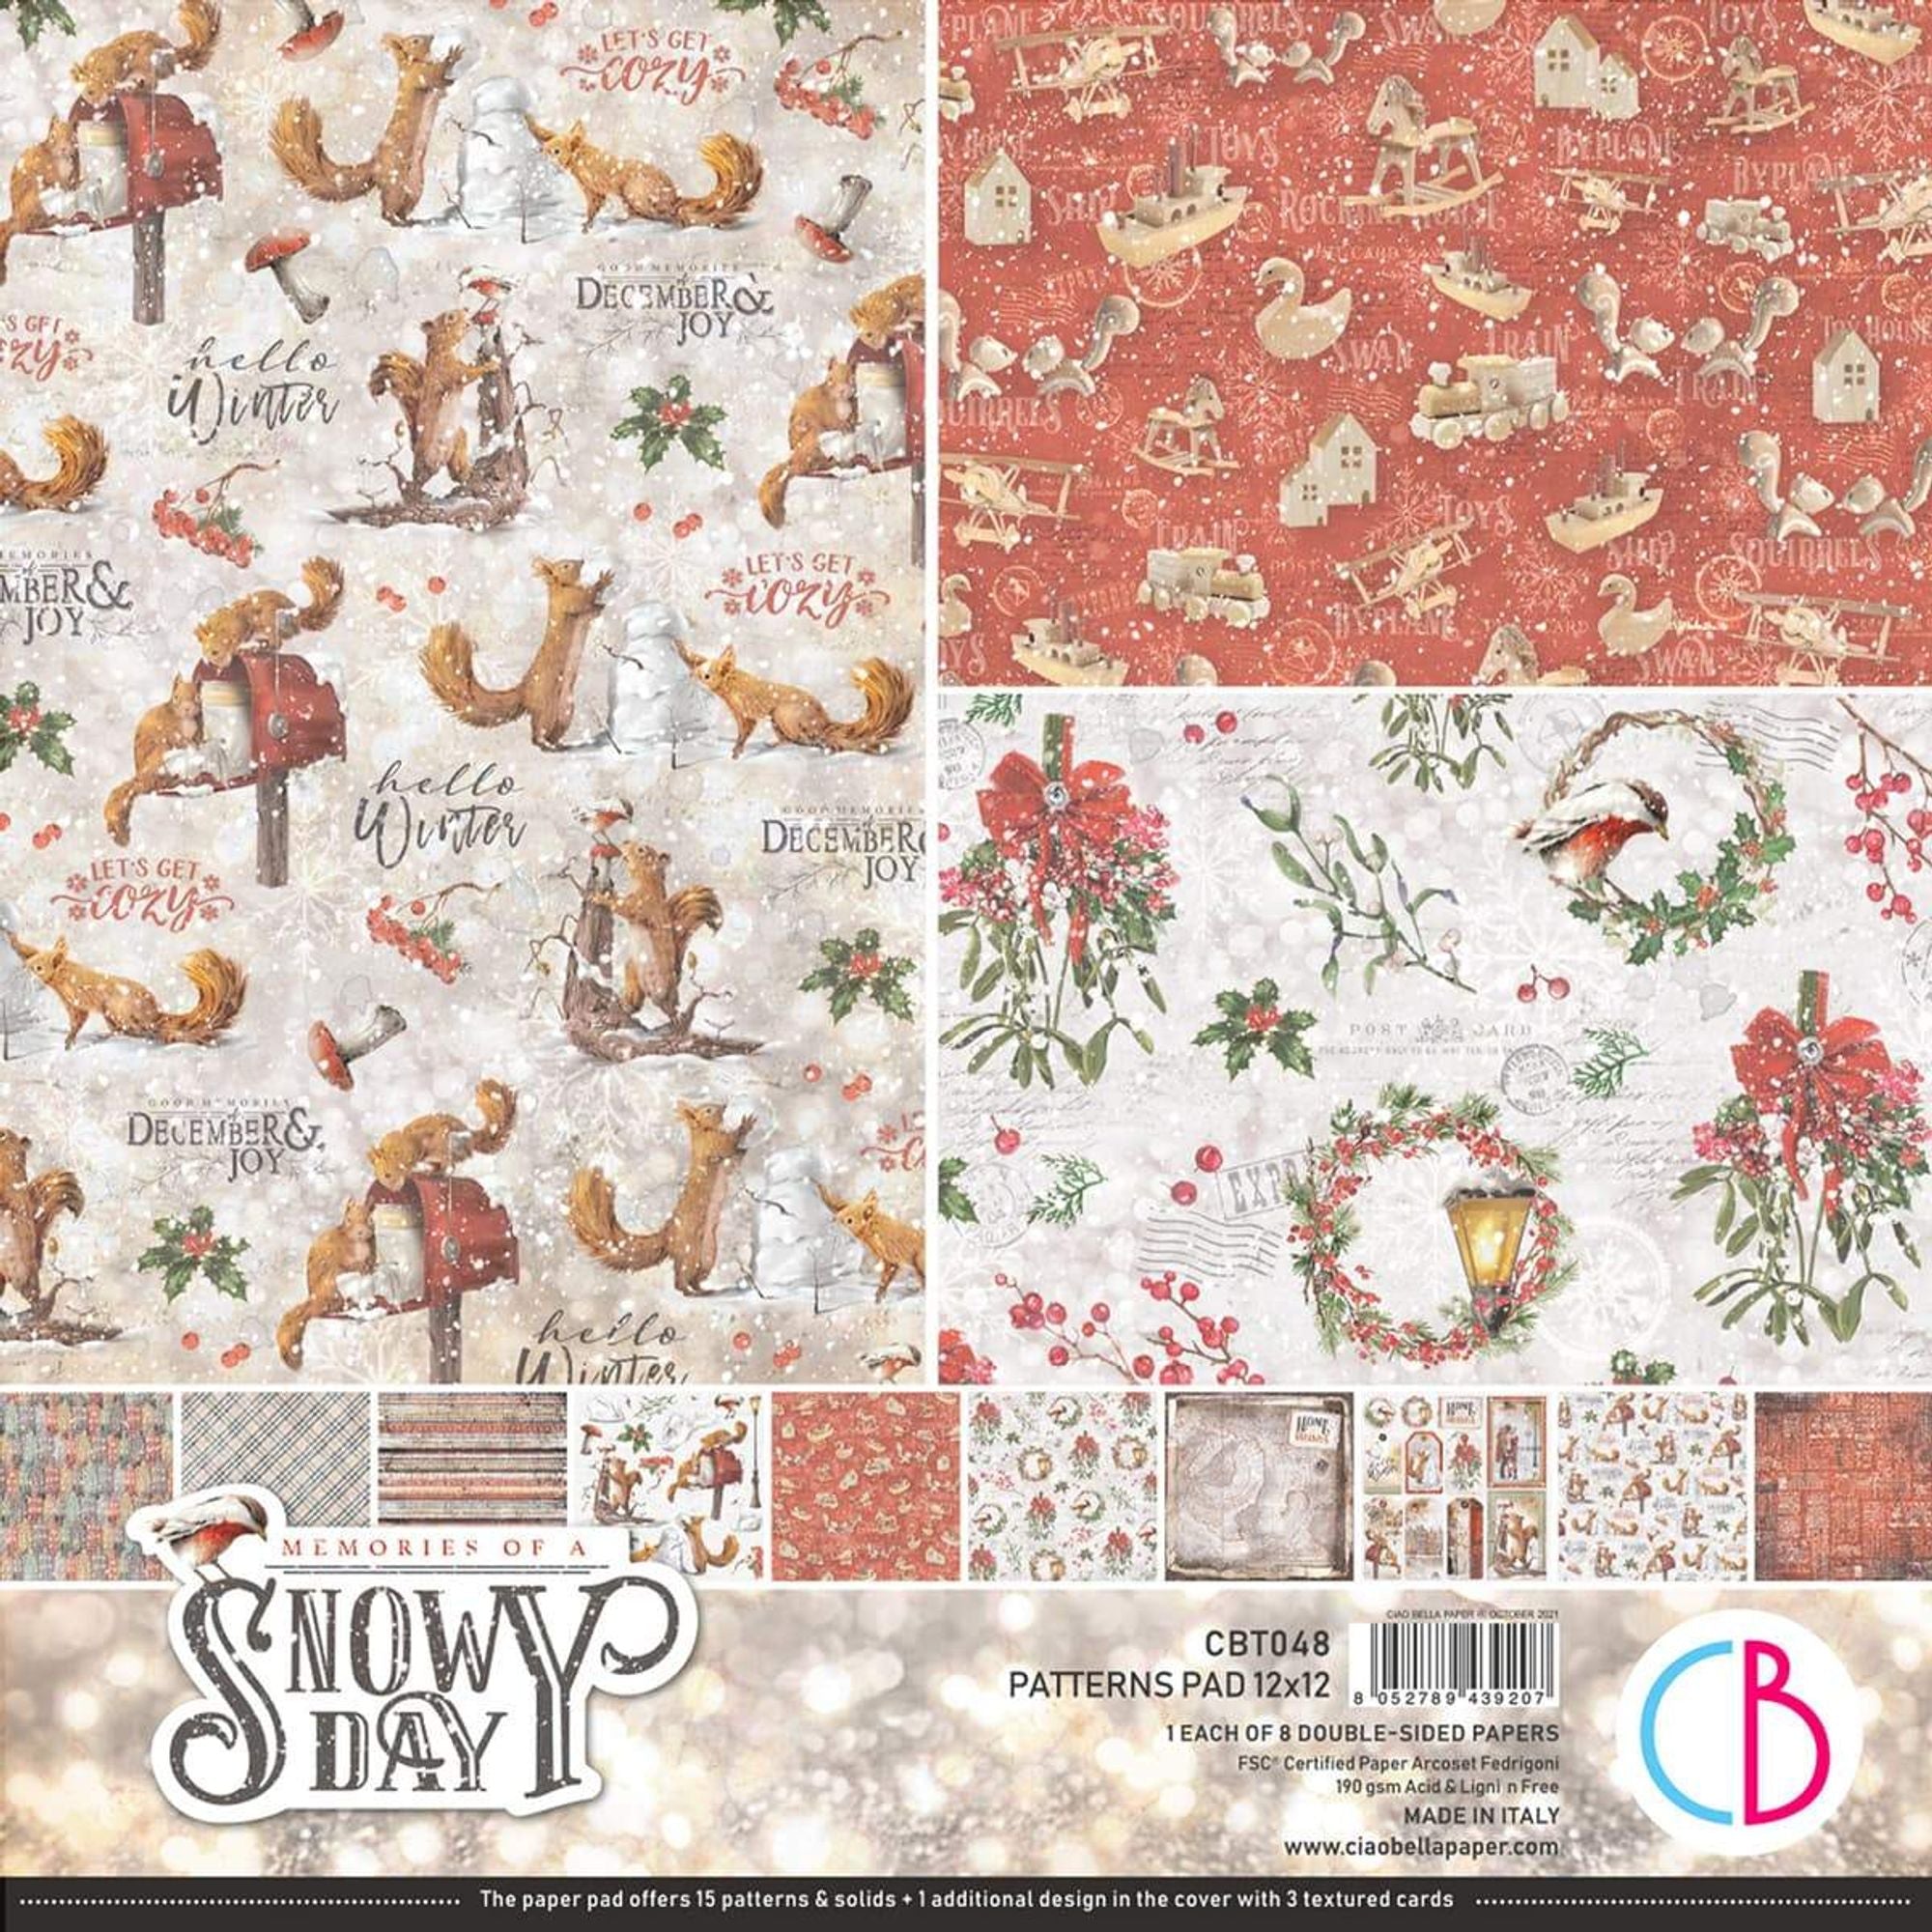 Ciao Bella Memories of a Snowy Day Patterns Pad 12"x12" 8/Pkg